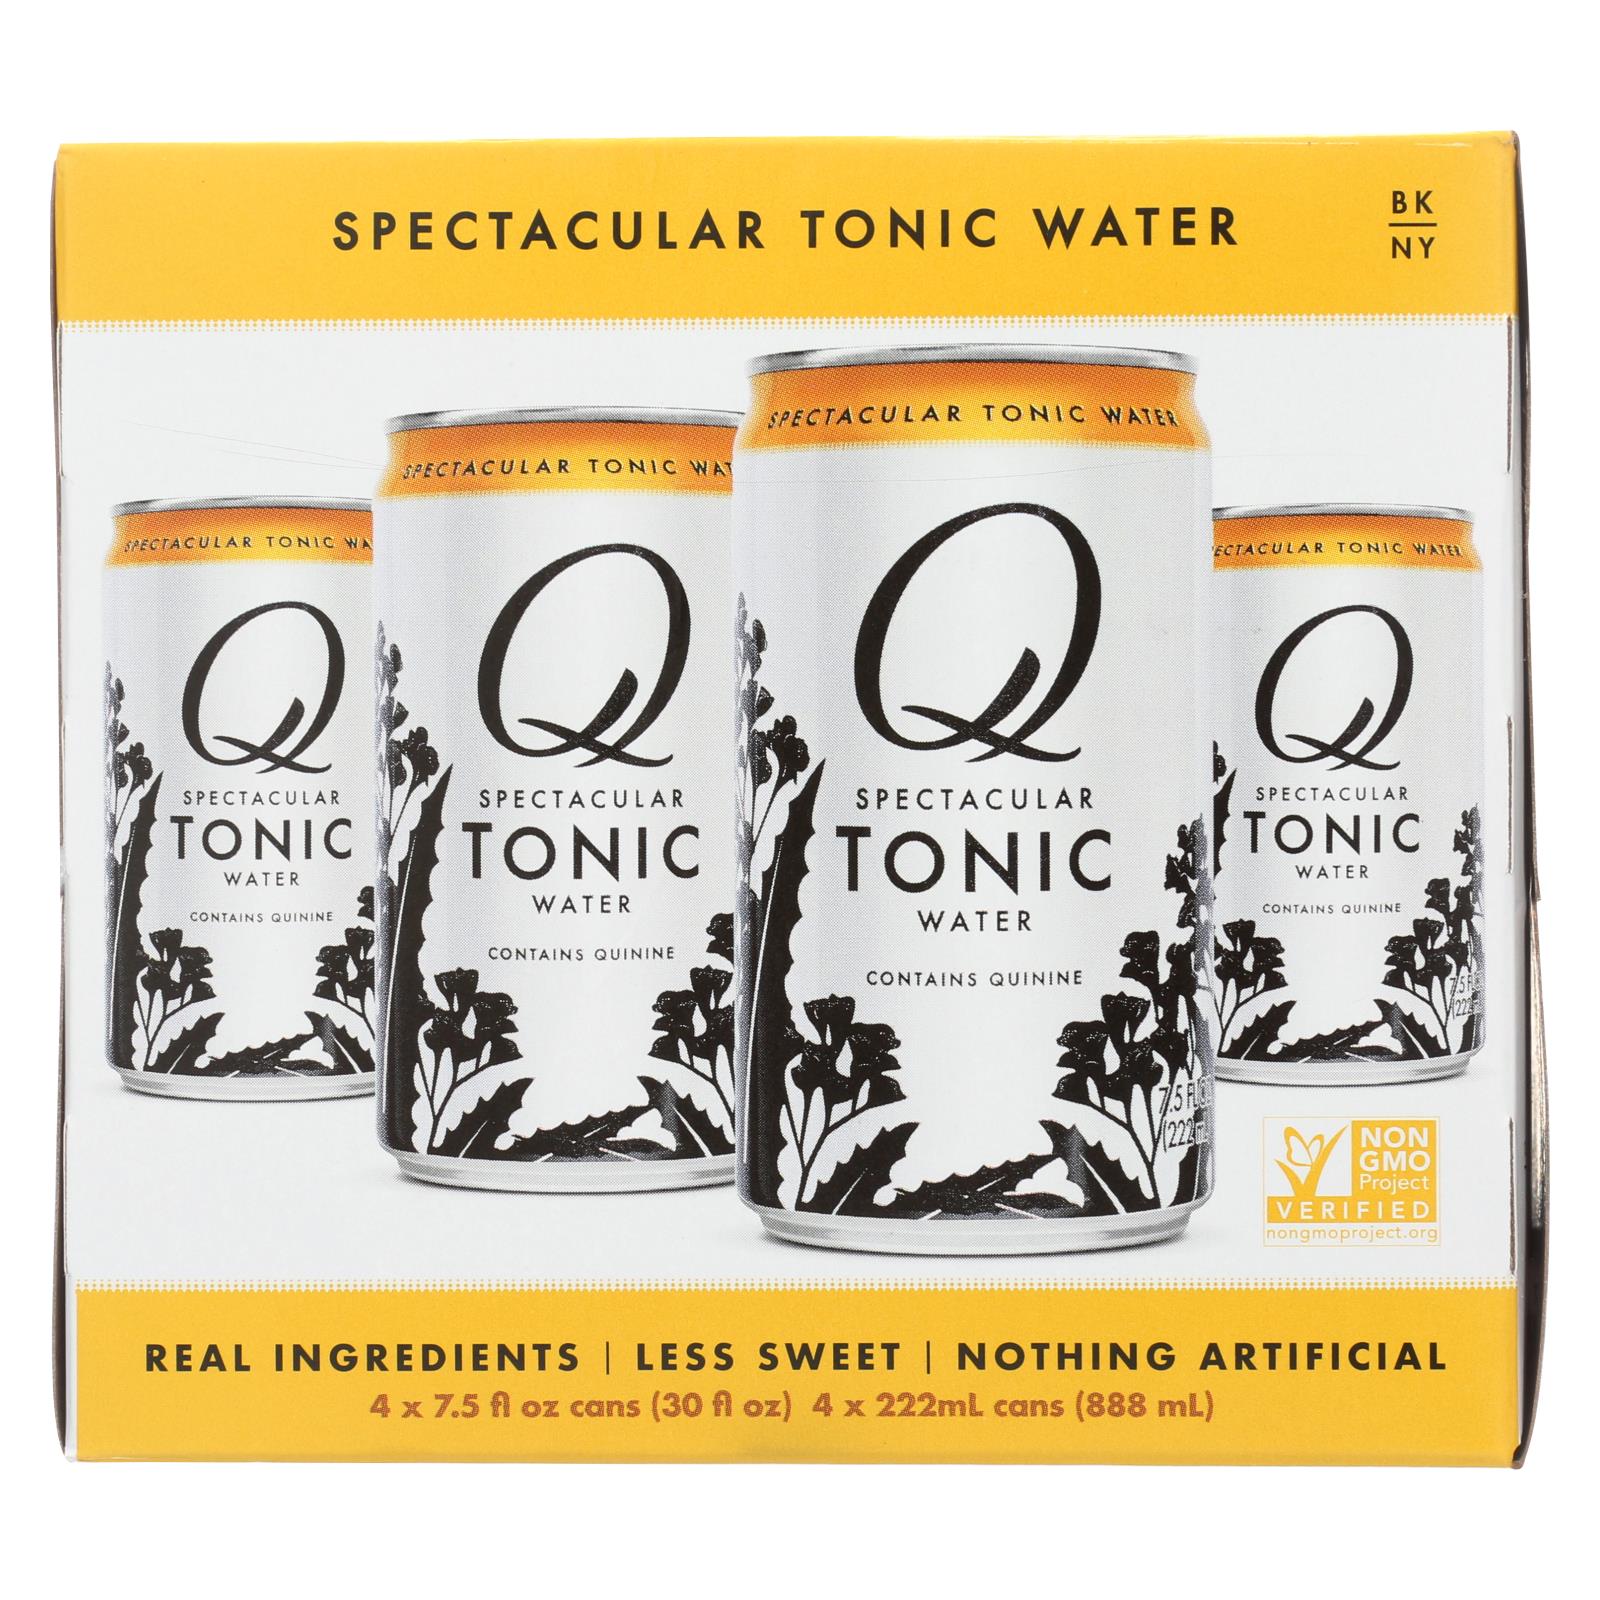 Q Drinks - Tonic Water - 6개 묶음상품/4 Packs/7.5oz Cans